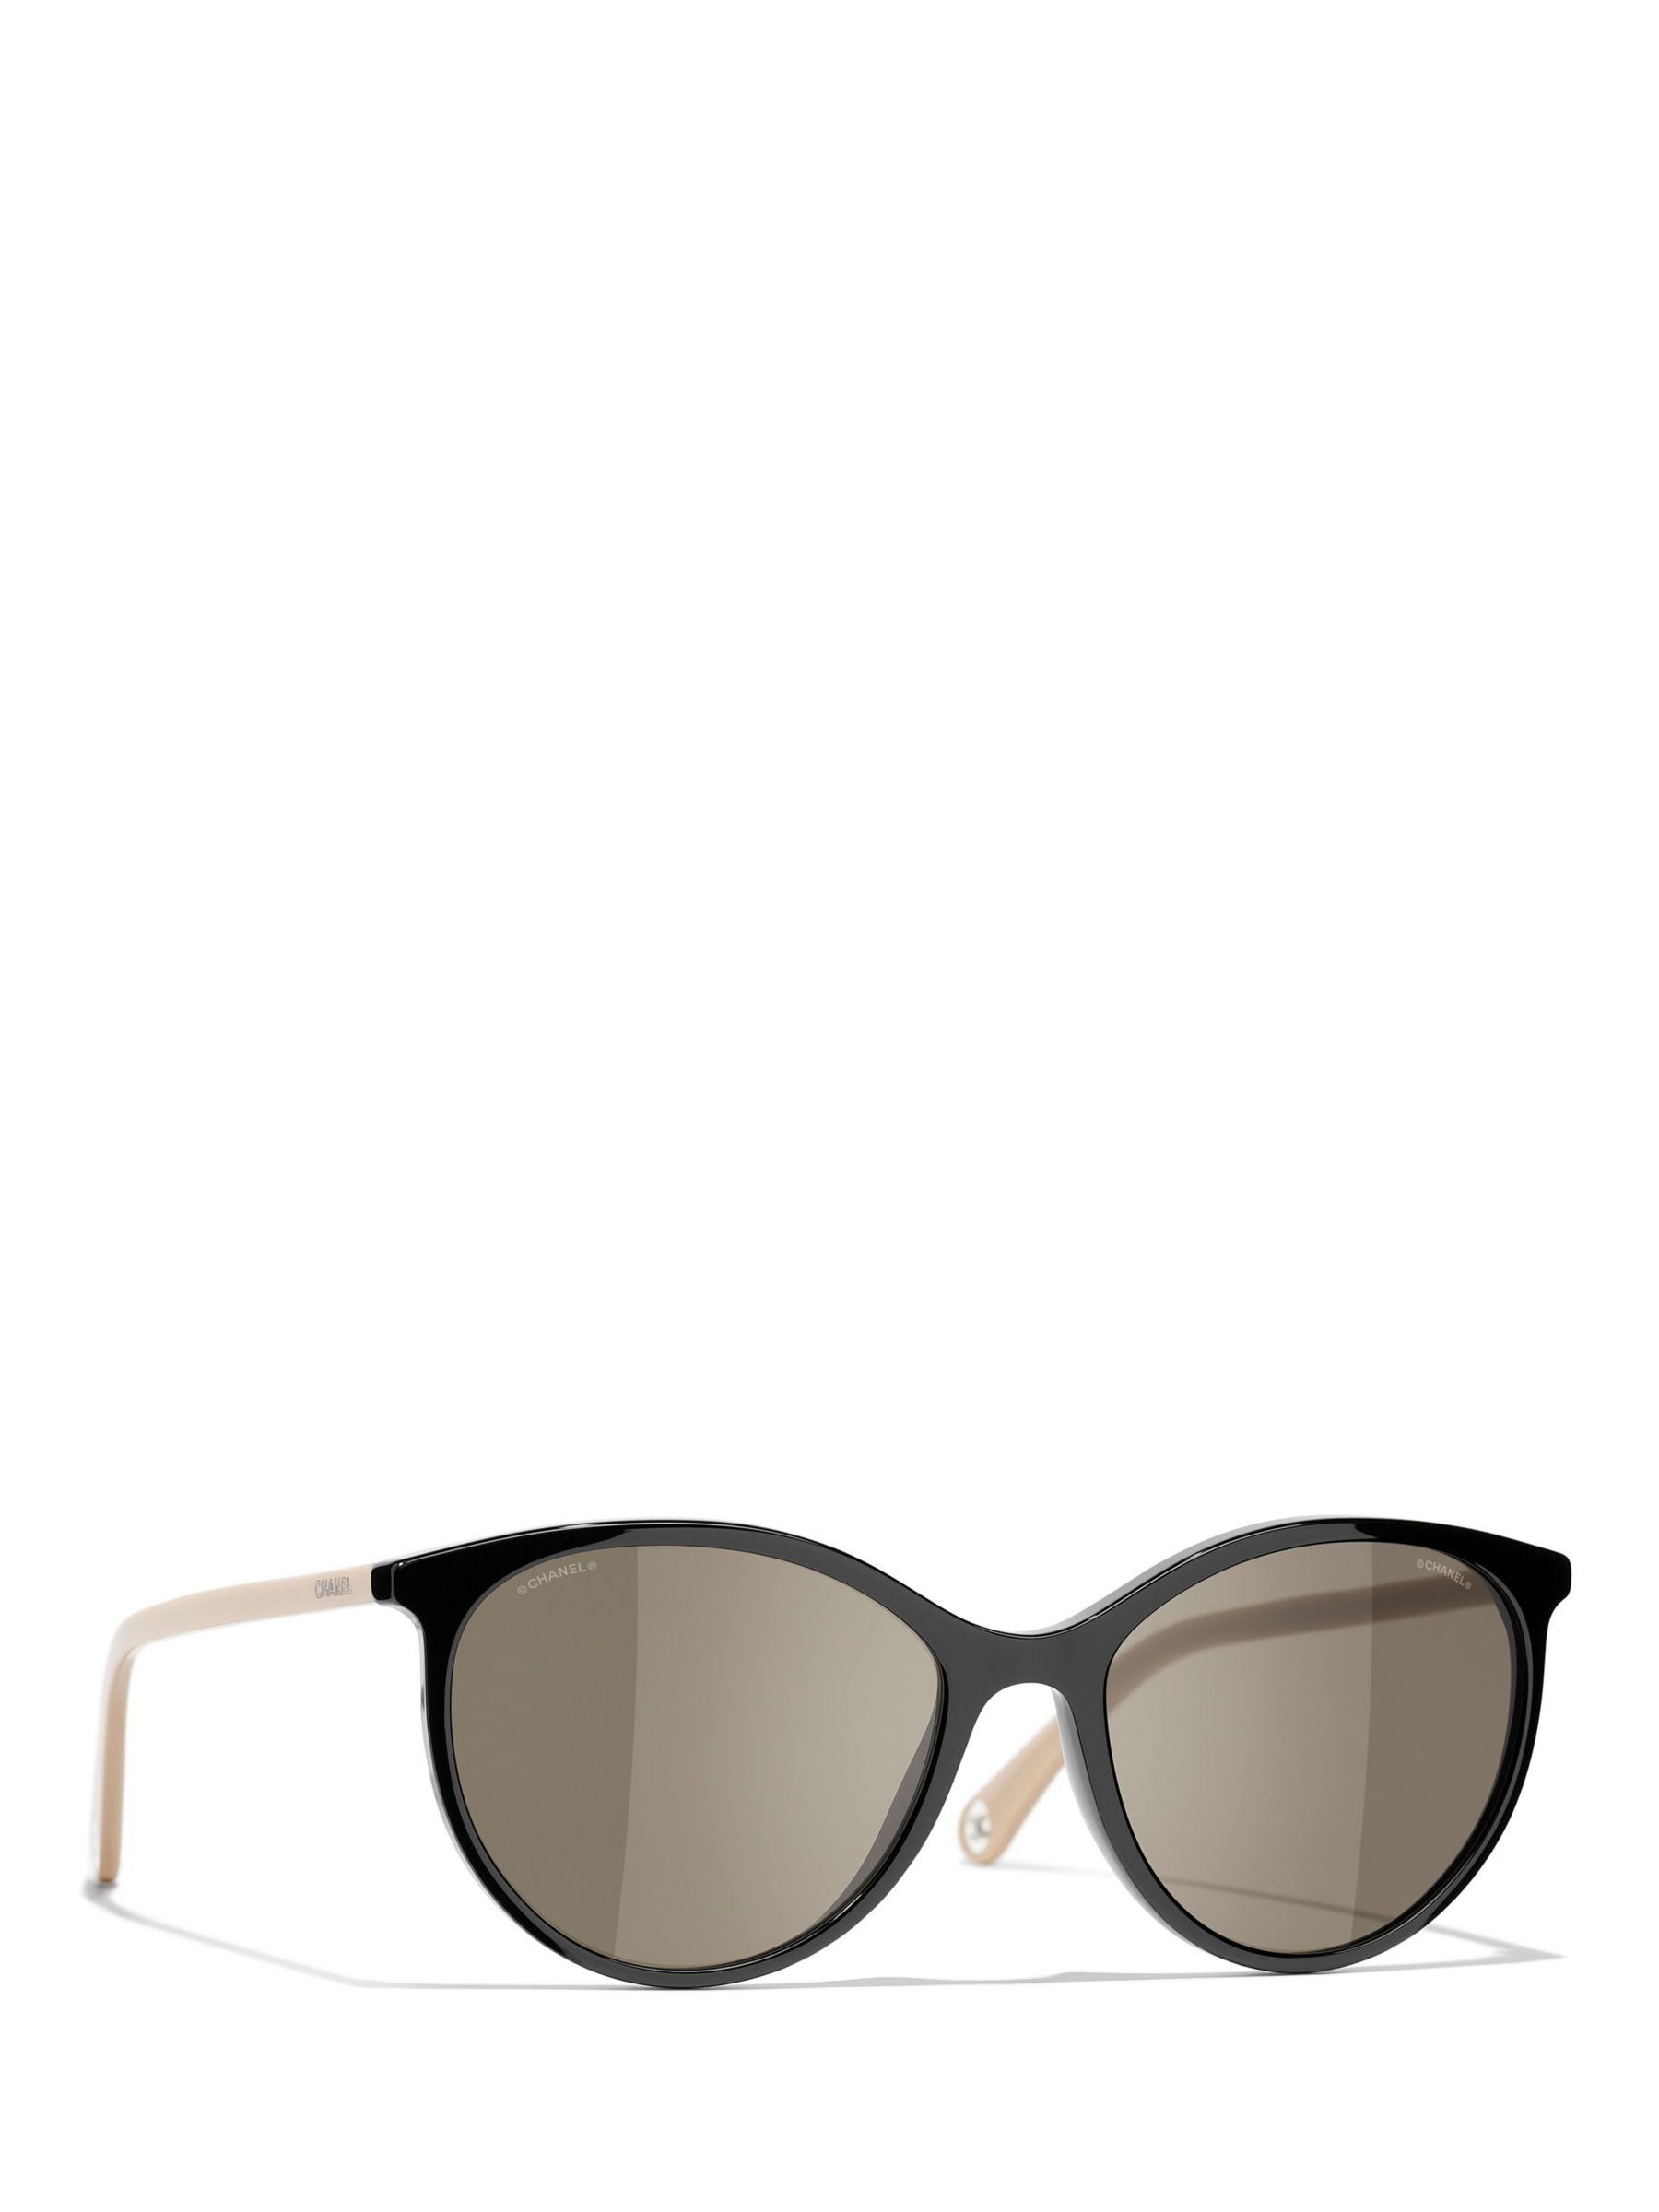 CHANEL Oval Sunglasses CH5448 Shiny Black/Brown at John Lewis & Partners